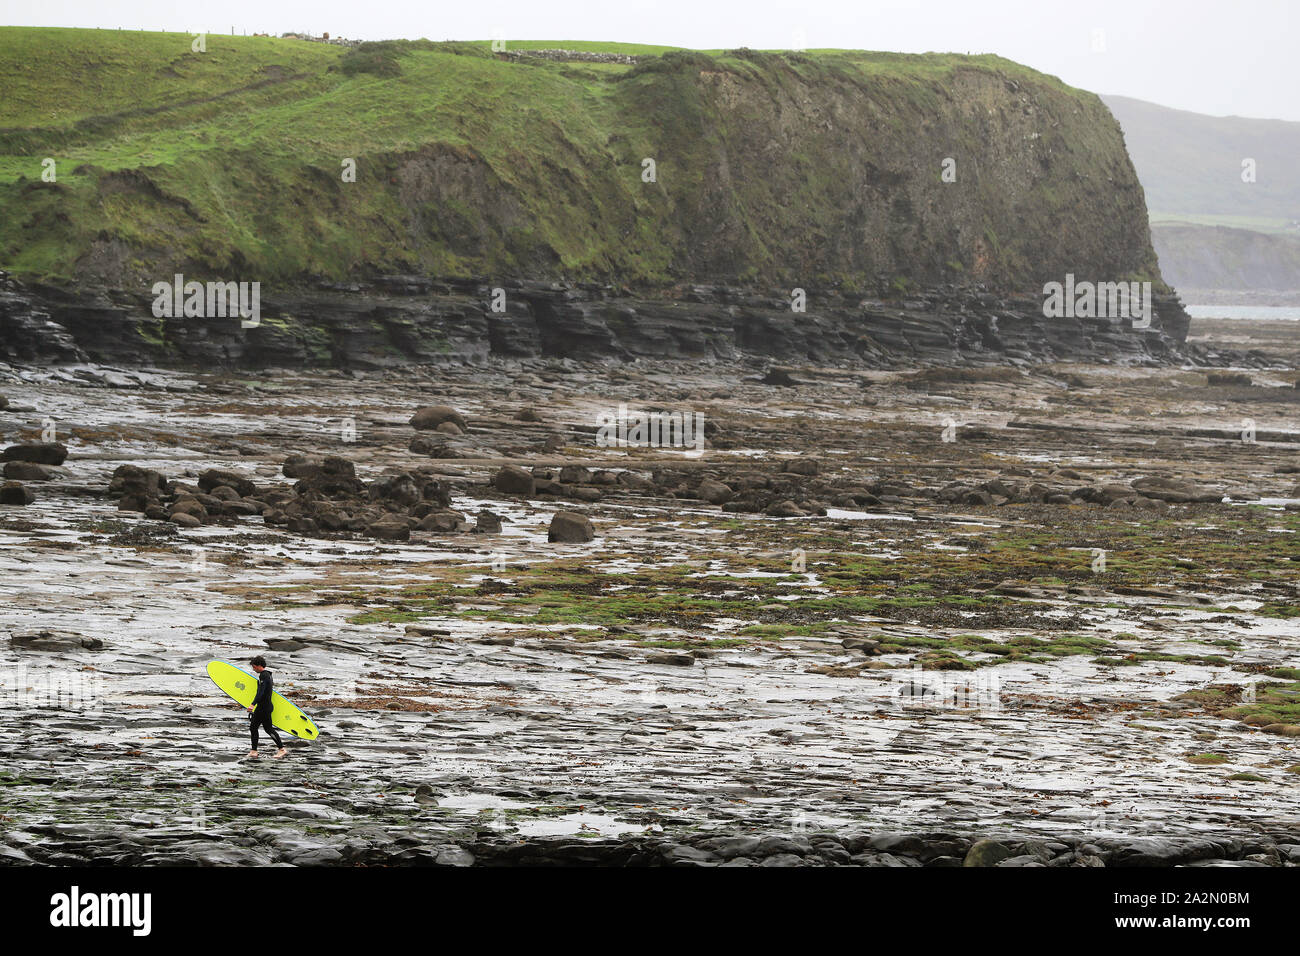 A surfer leaves the water in Lahinch, County Clare, on the West Coast of Ireland as storm Lorenzo is expected to make landfall, with a status orange wind warning and a yellow rain warning having been issued. Stock Photo